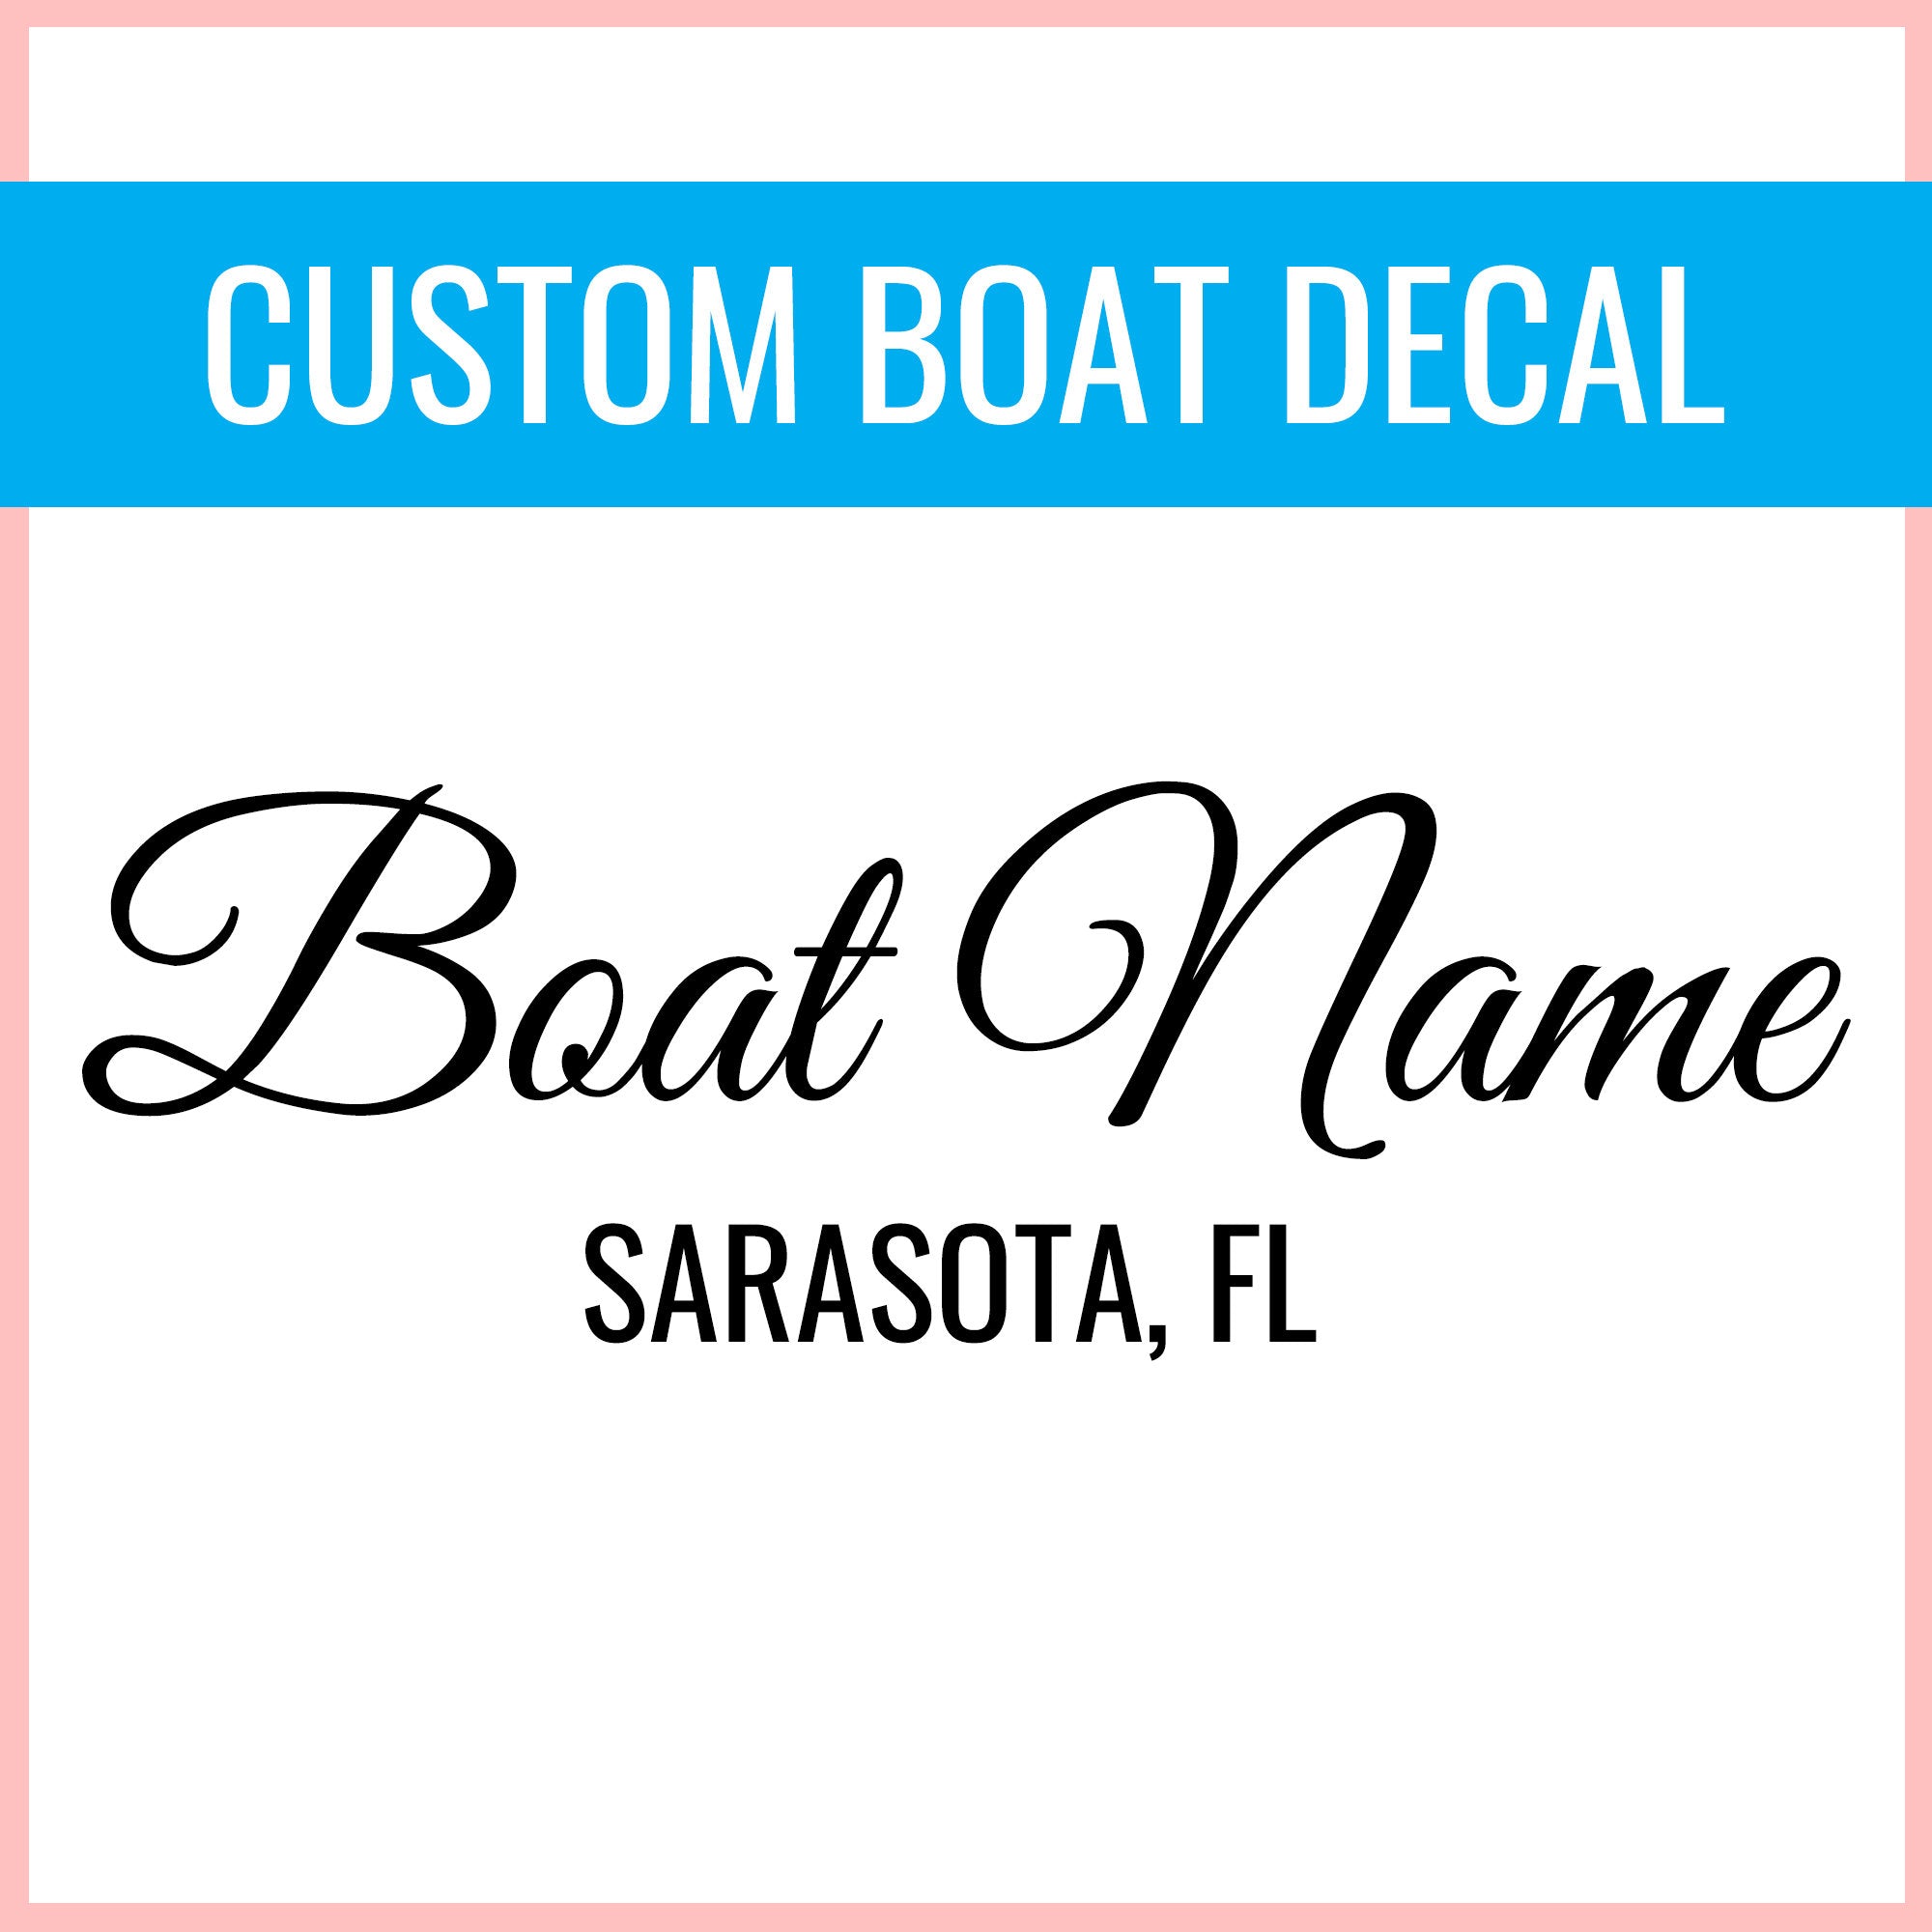 Custom Yacht Decal with Hailing Port State - Permanent Marine-Grade Vinyl Lettering for Signs, Transom, Boat, Ship, Sailboat, and More!